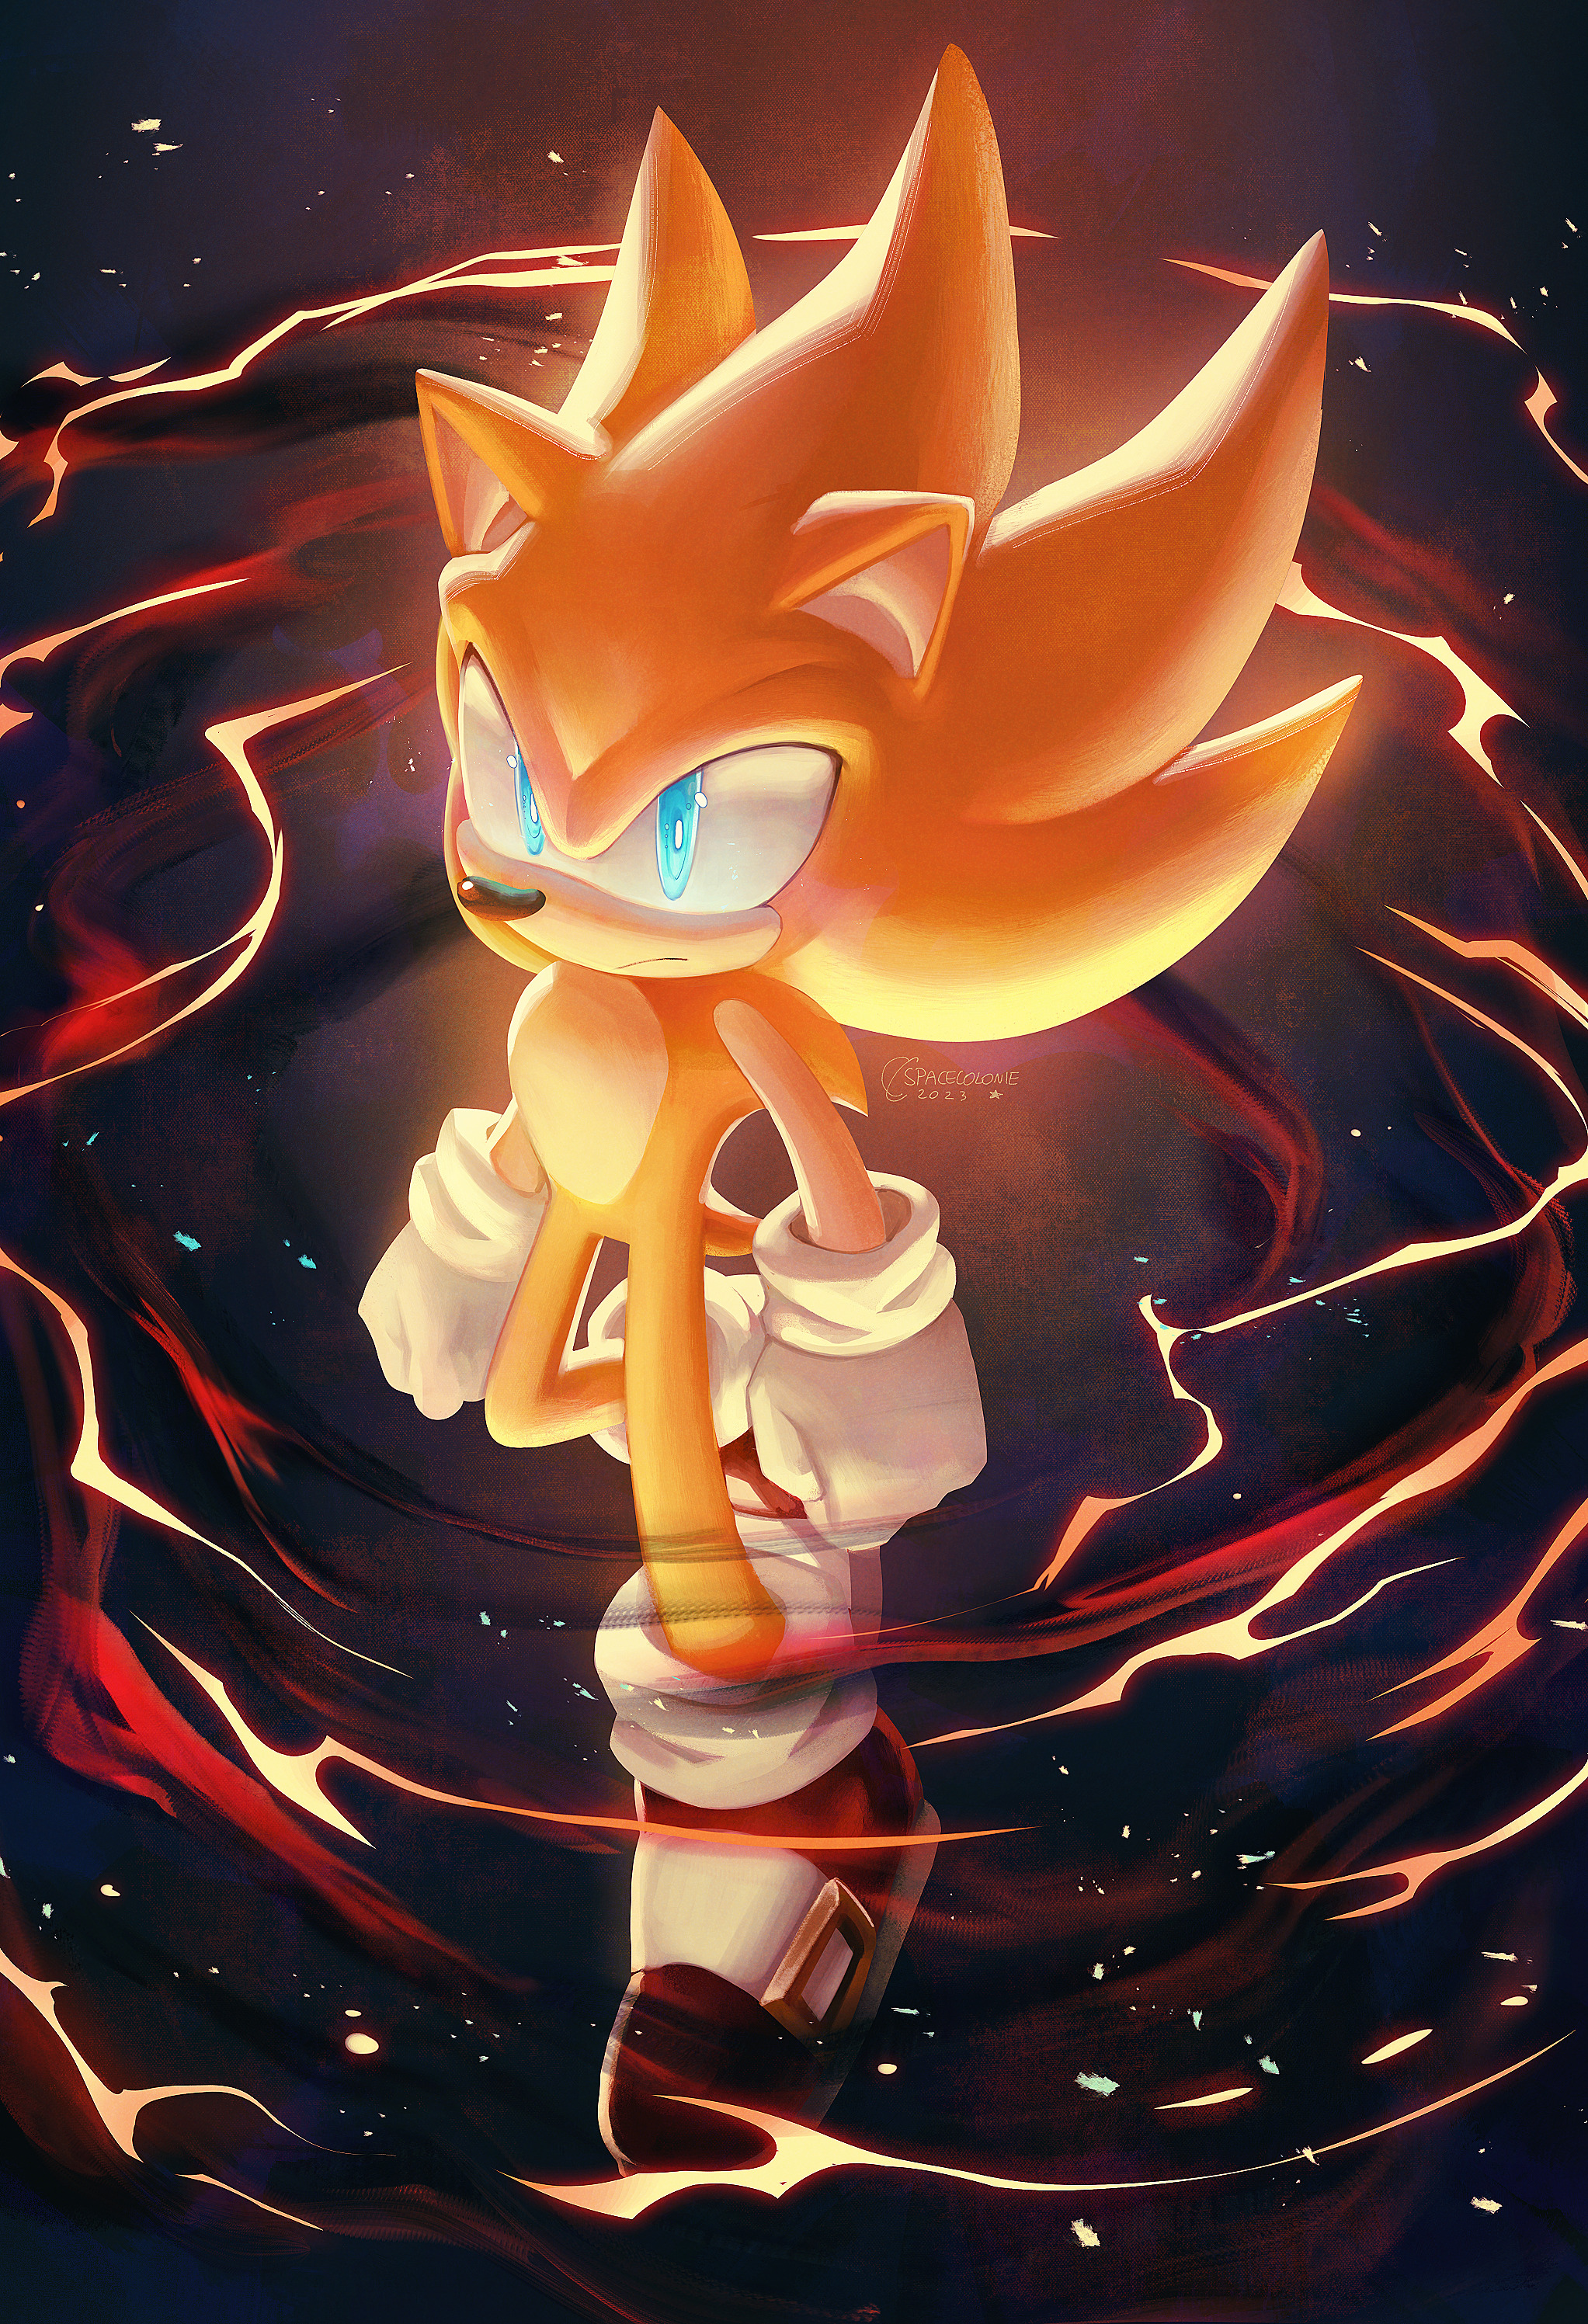 sonic the hedgehog, shadow the hedgehog, super sonic, and super shadow ( sonic) drawn by spacecolonie